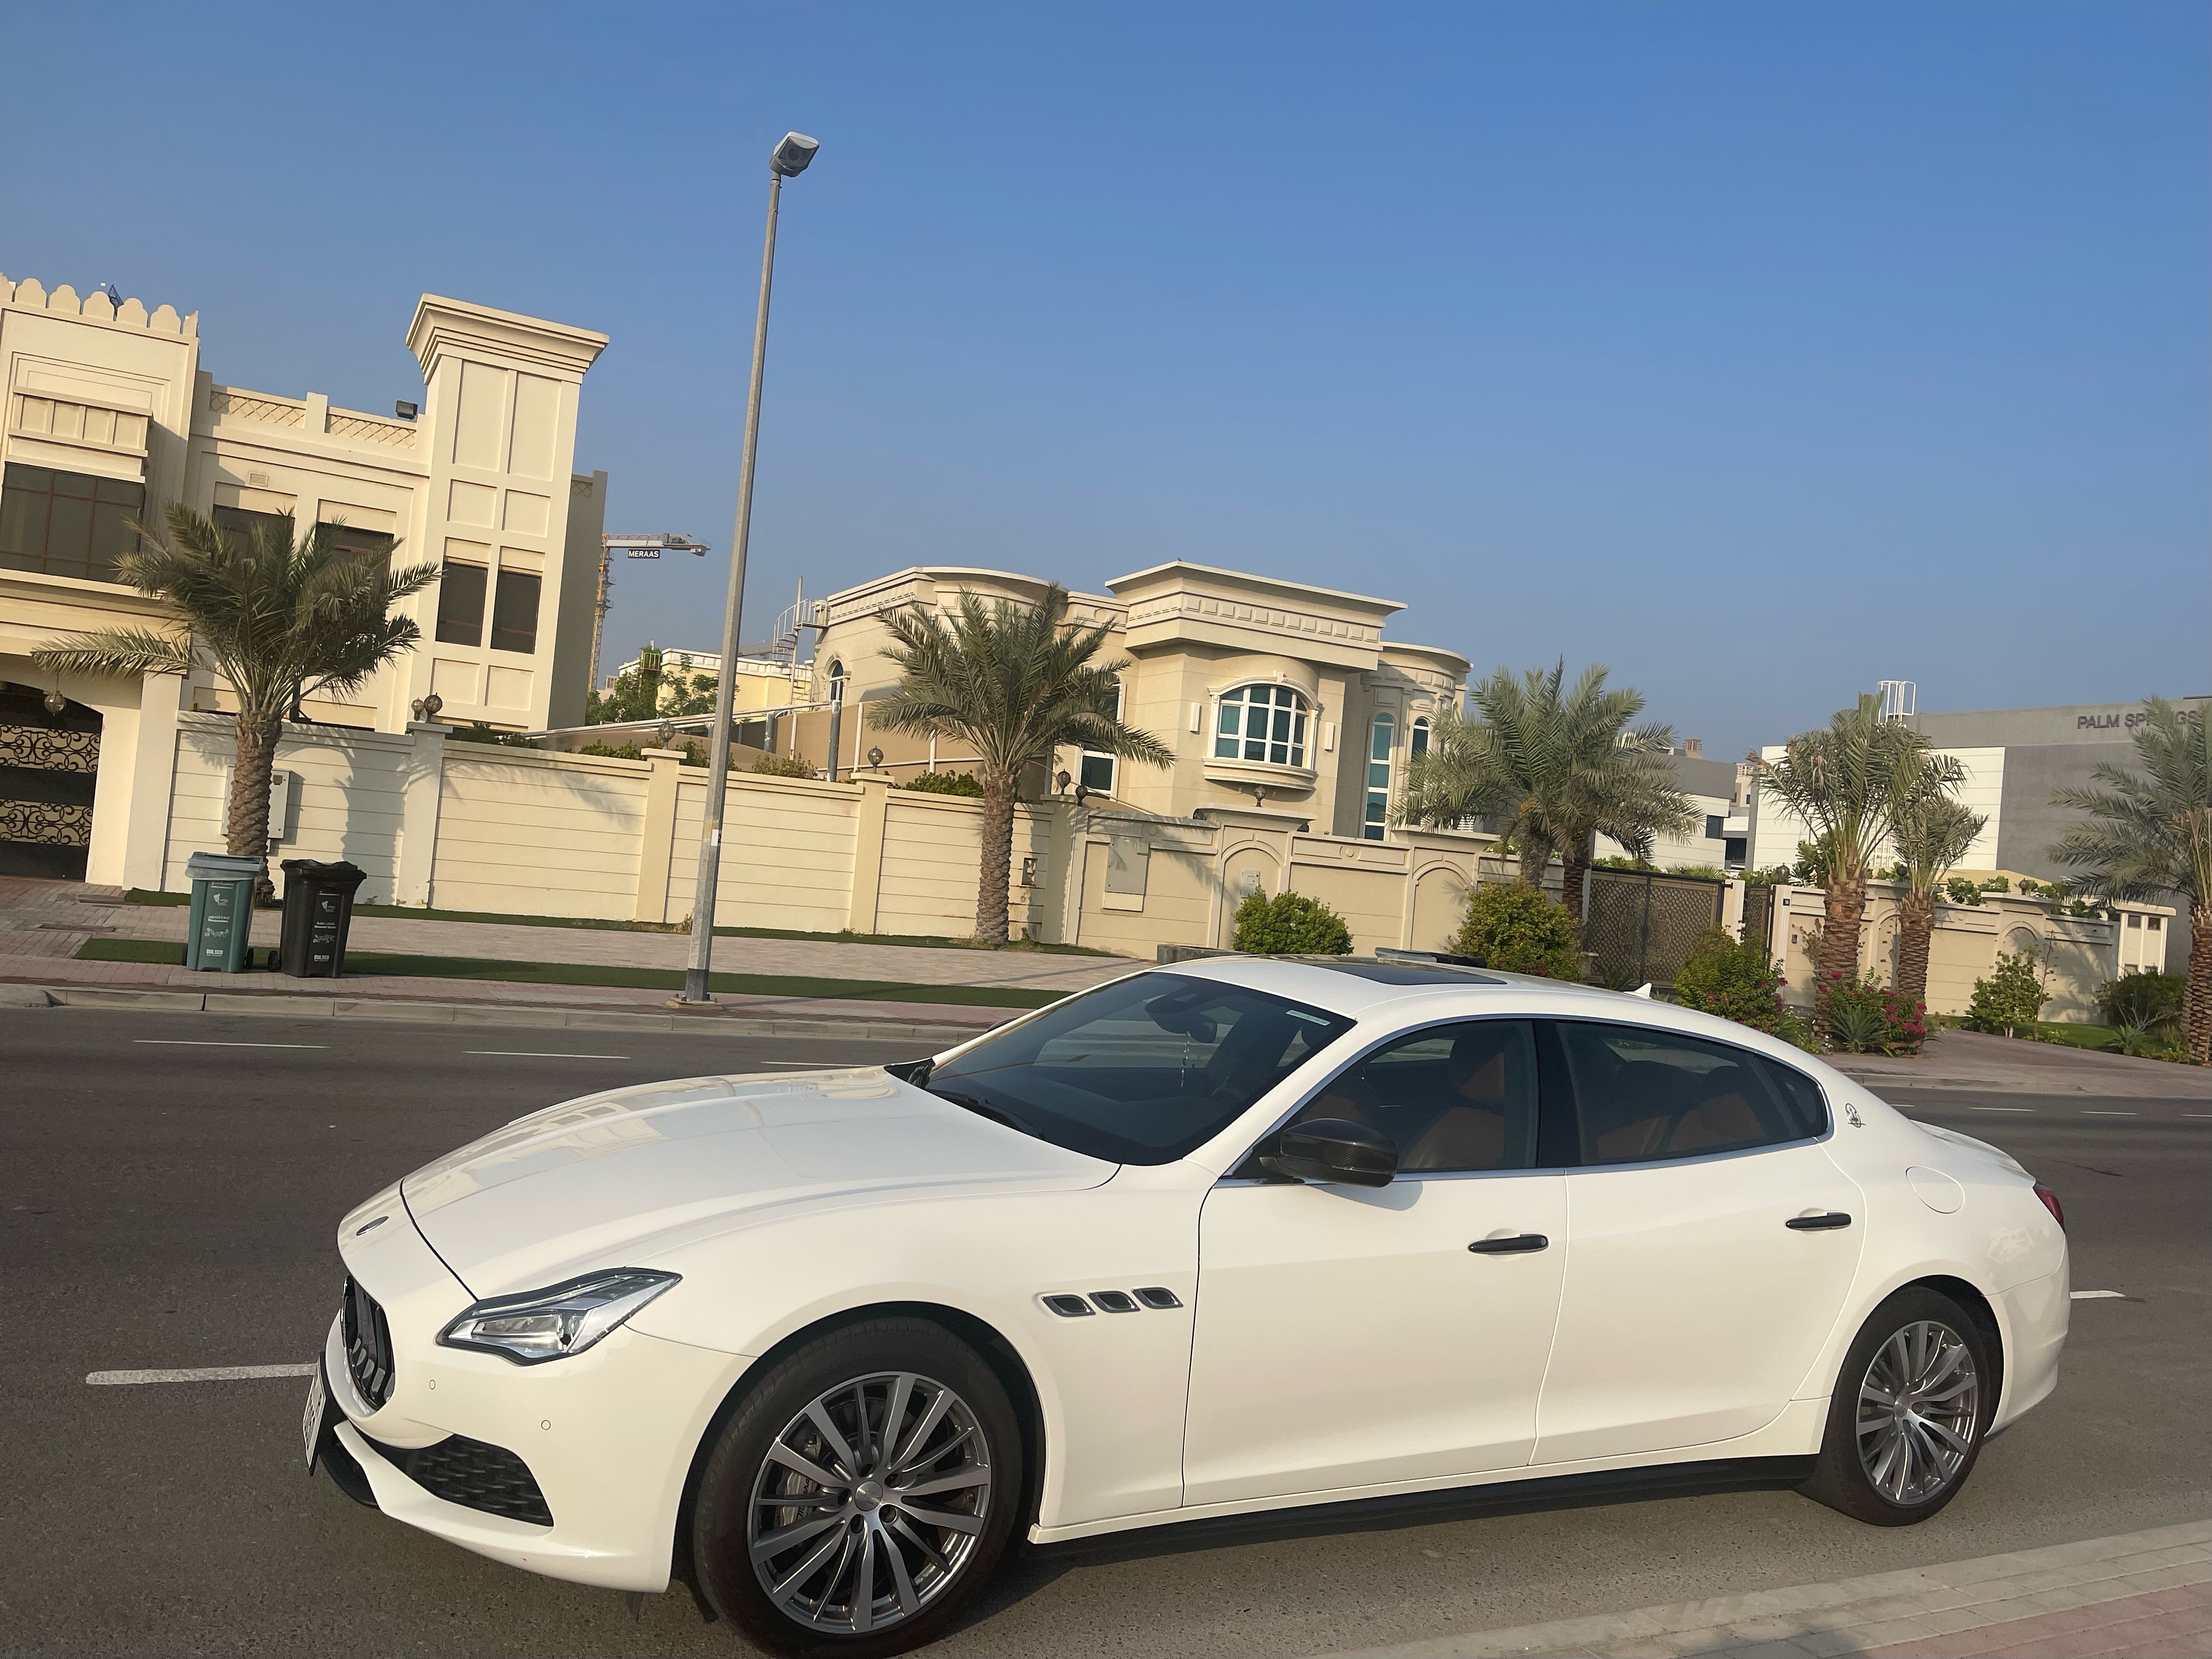 Luxury 2020 Maserati Quattroporte S with full manufacturer maintainance and warranty until Oct’ 2025-pic_1